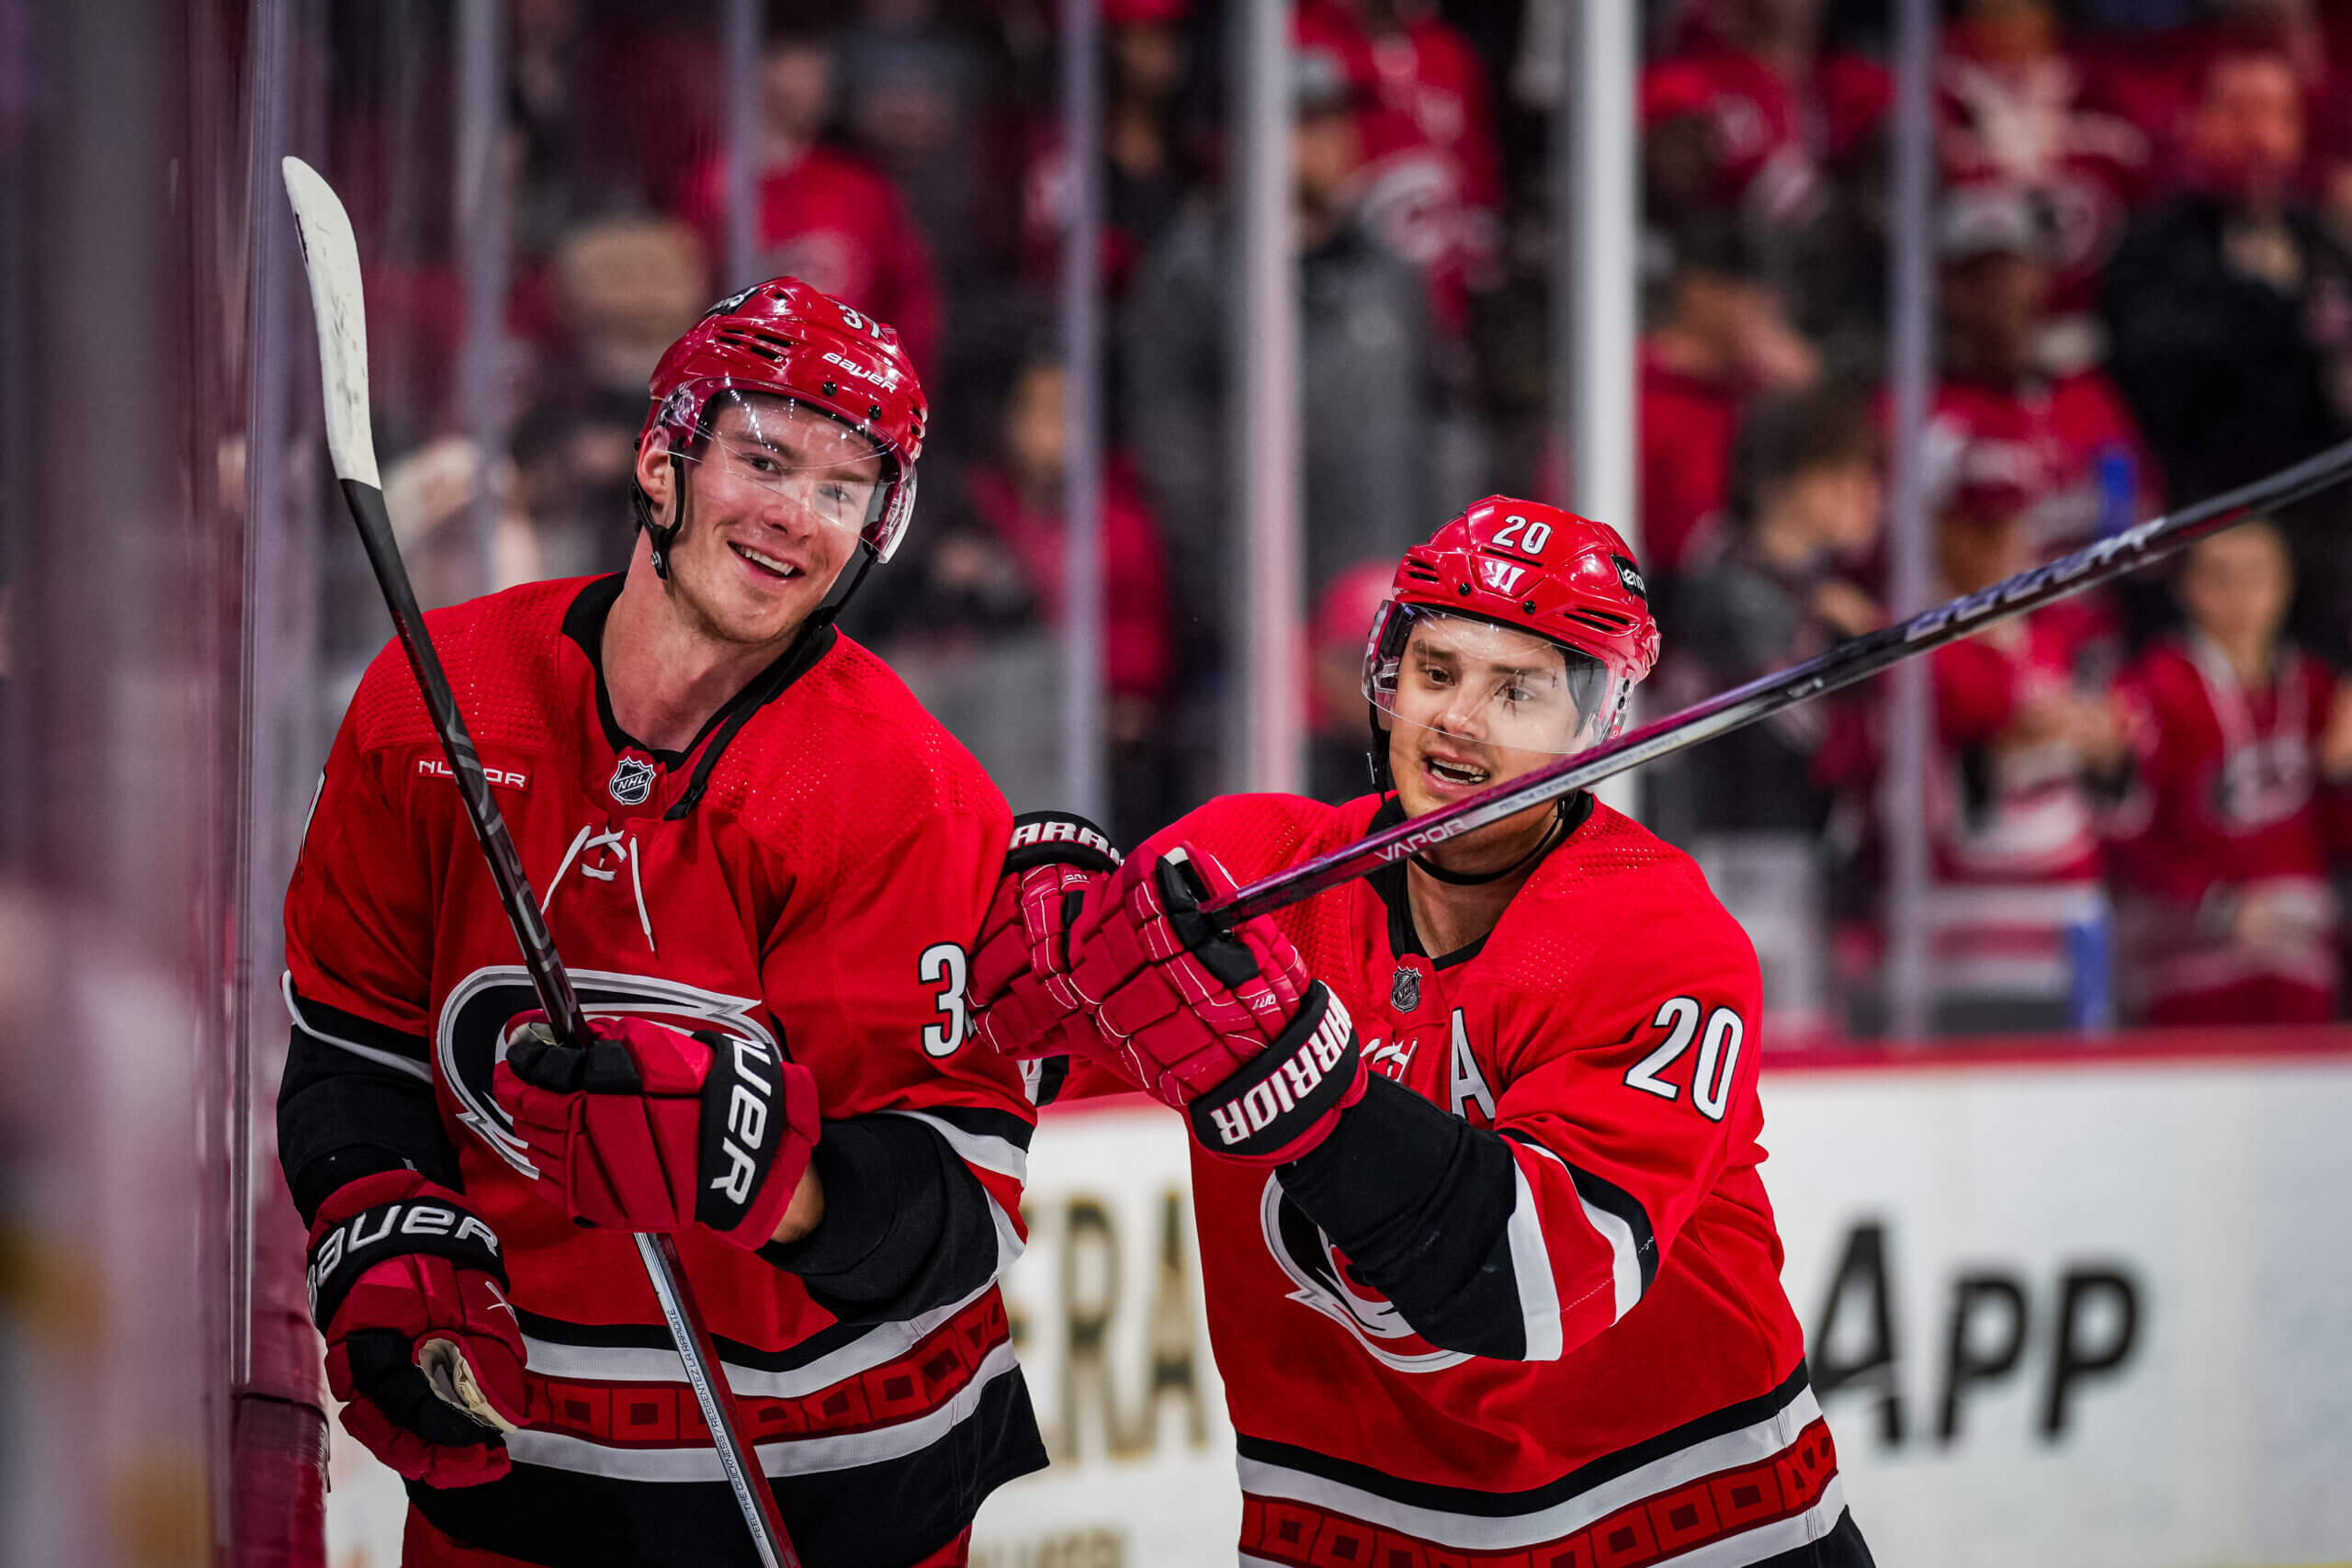 The Hurricanes' top line might be the best in the NHL. Now if only they could score.